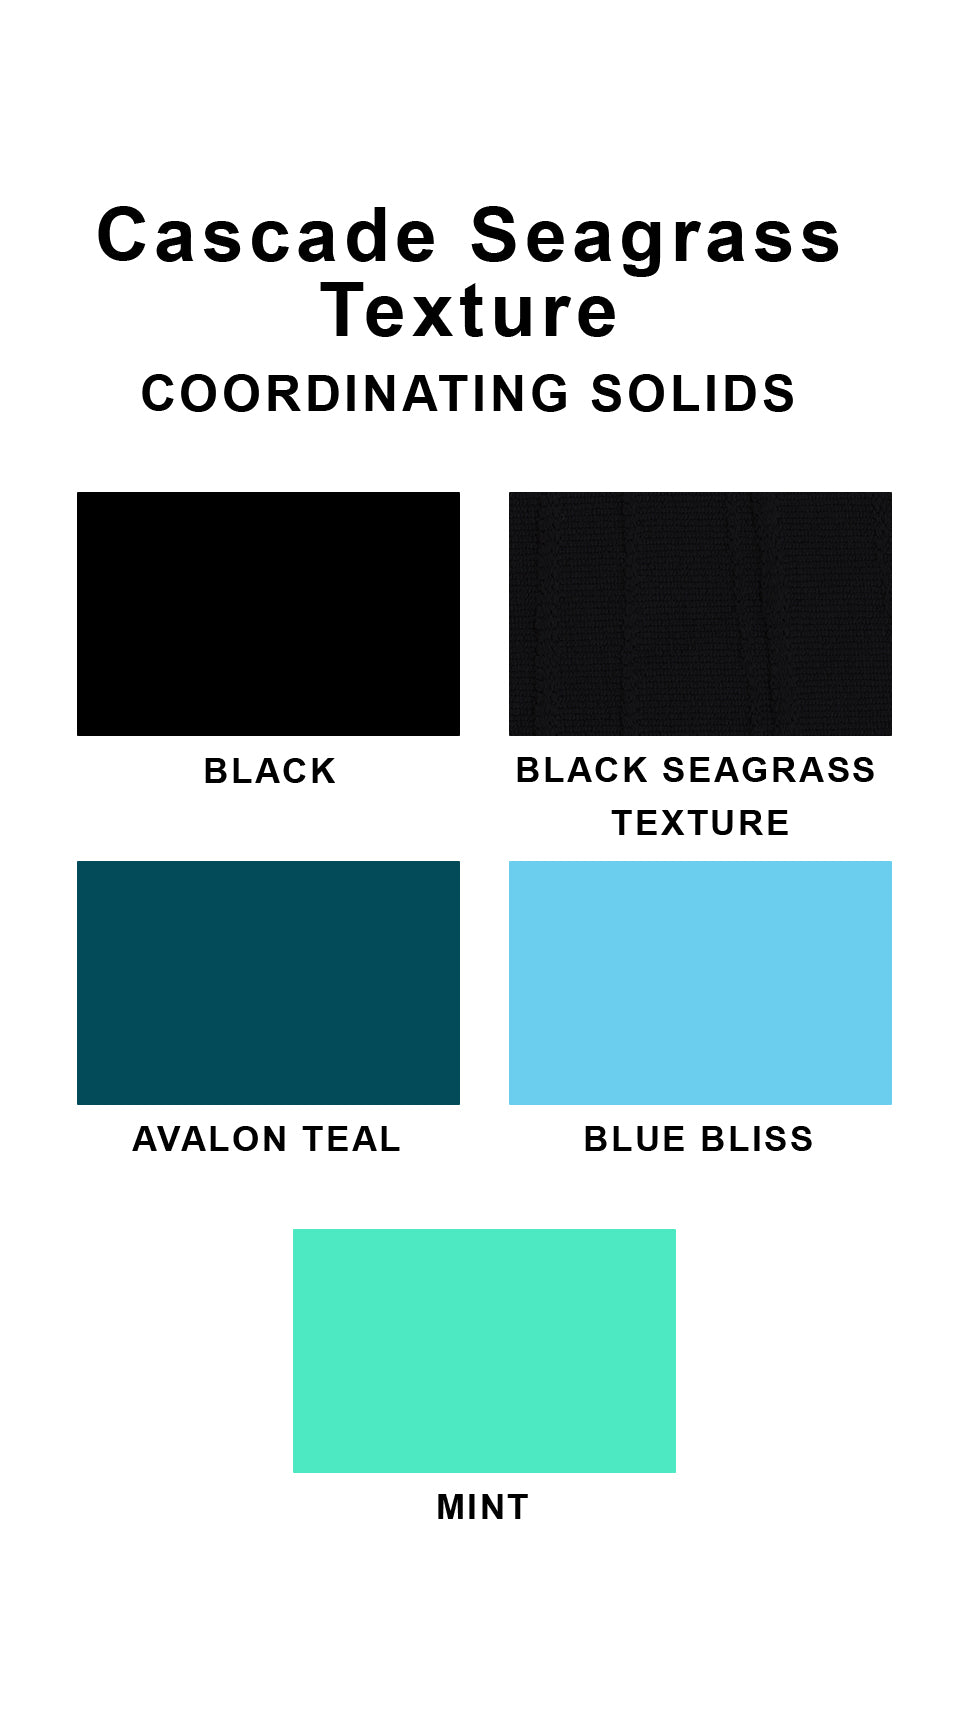 Coordinating solids chart for Cascade Seagrass Texture swimsuit print: Black, Black Seagrass Texture, Avalon Teal, Blue Bliss and Mint